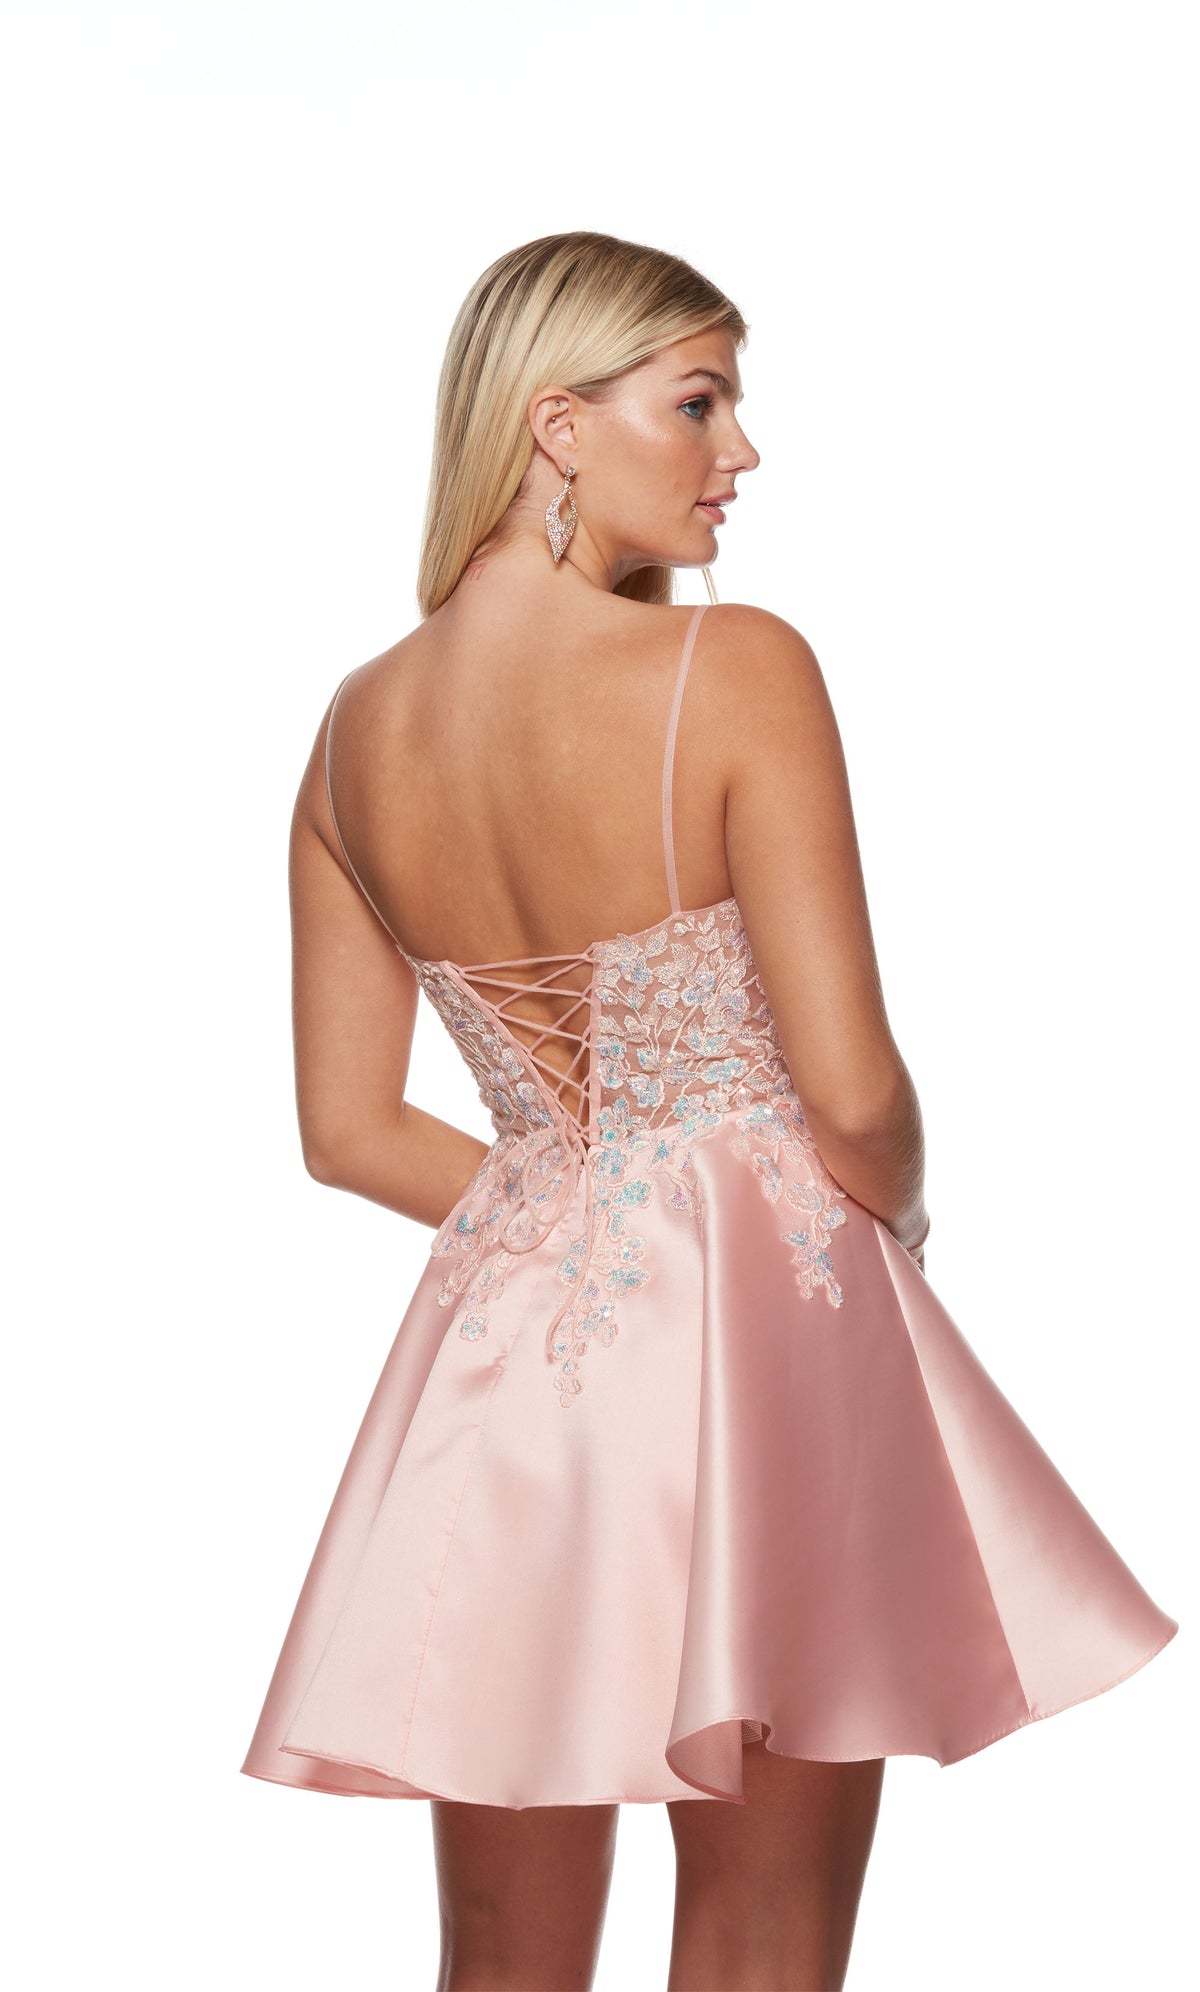 A blush pink short party dress featuring a sheer lace bodice, adorned with intricate floral lace appliques and a lace-up back.